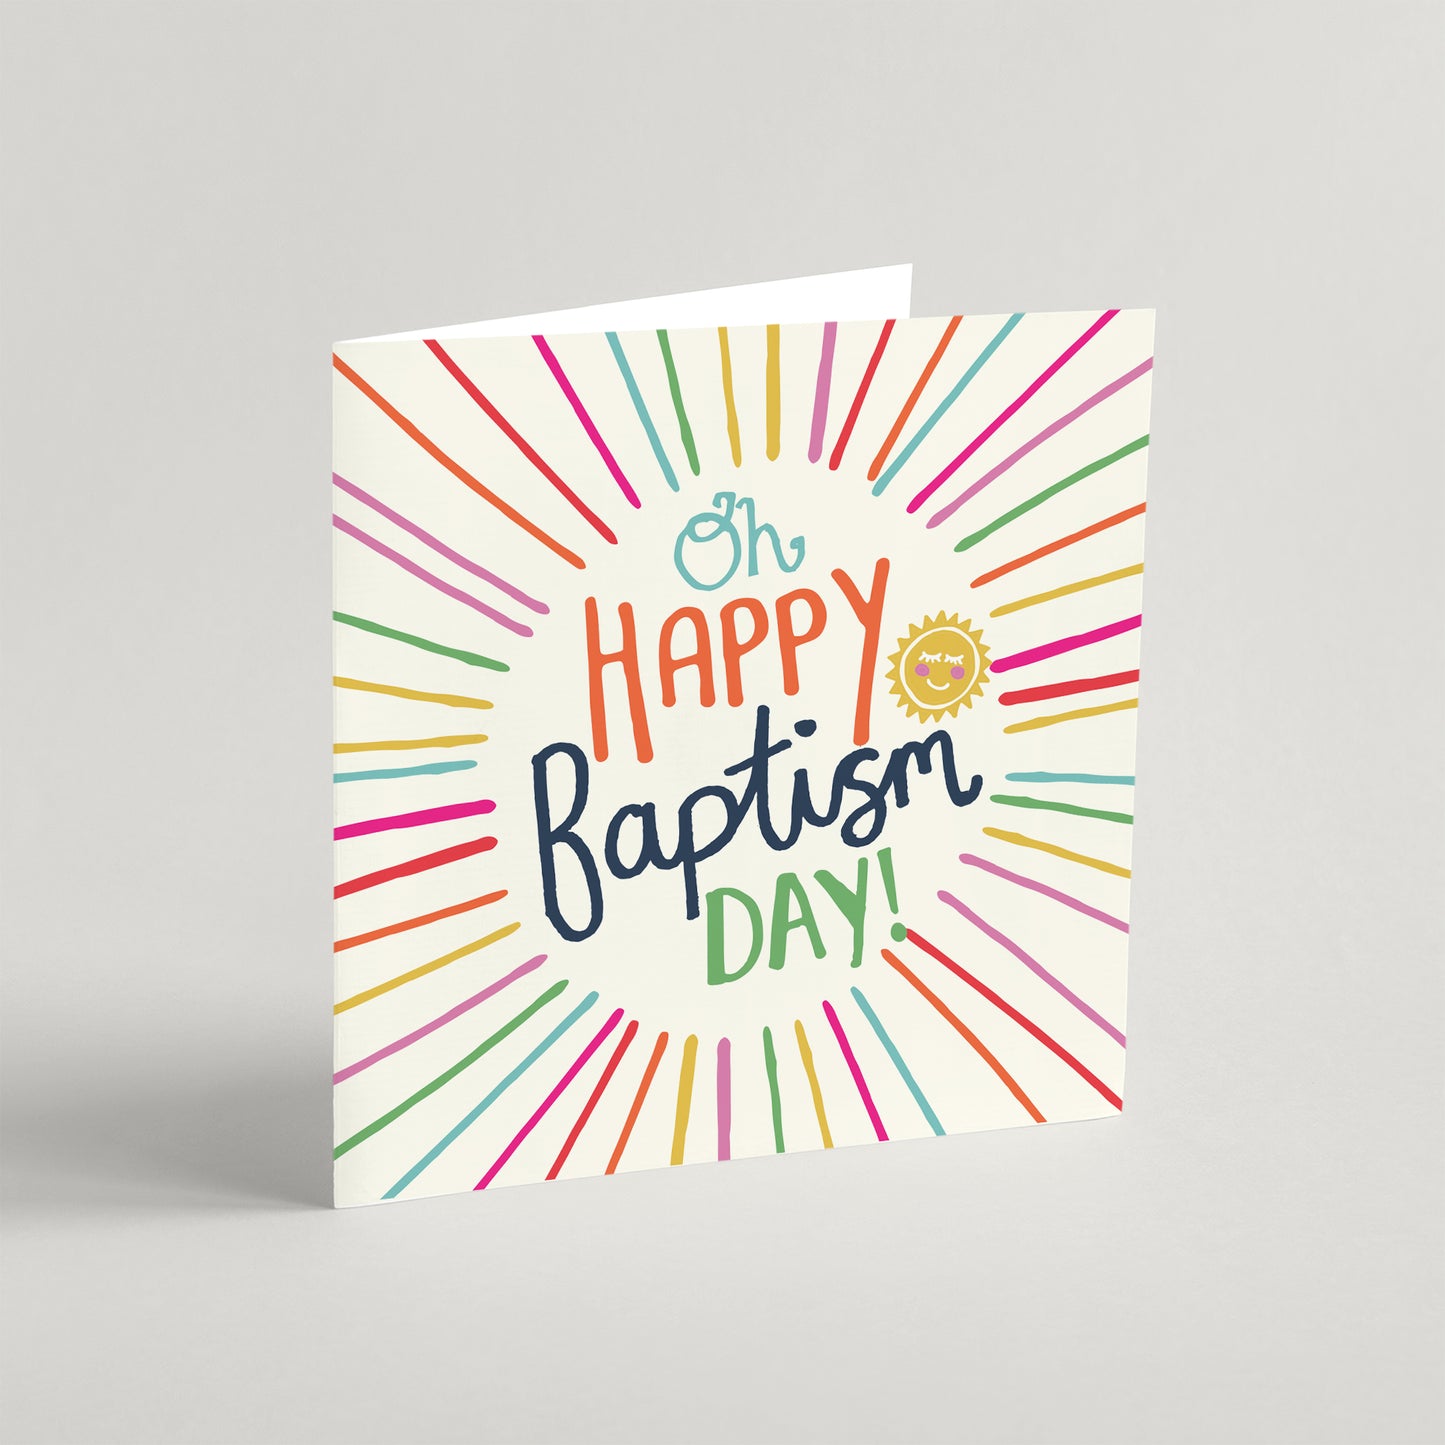 'Oh Happy Baptism Day' Greeting Card & Envelope